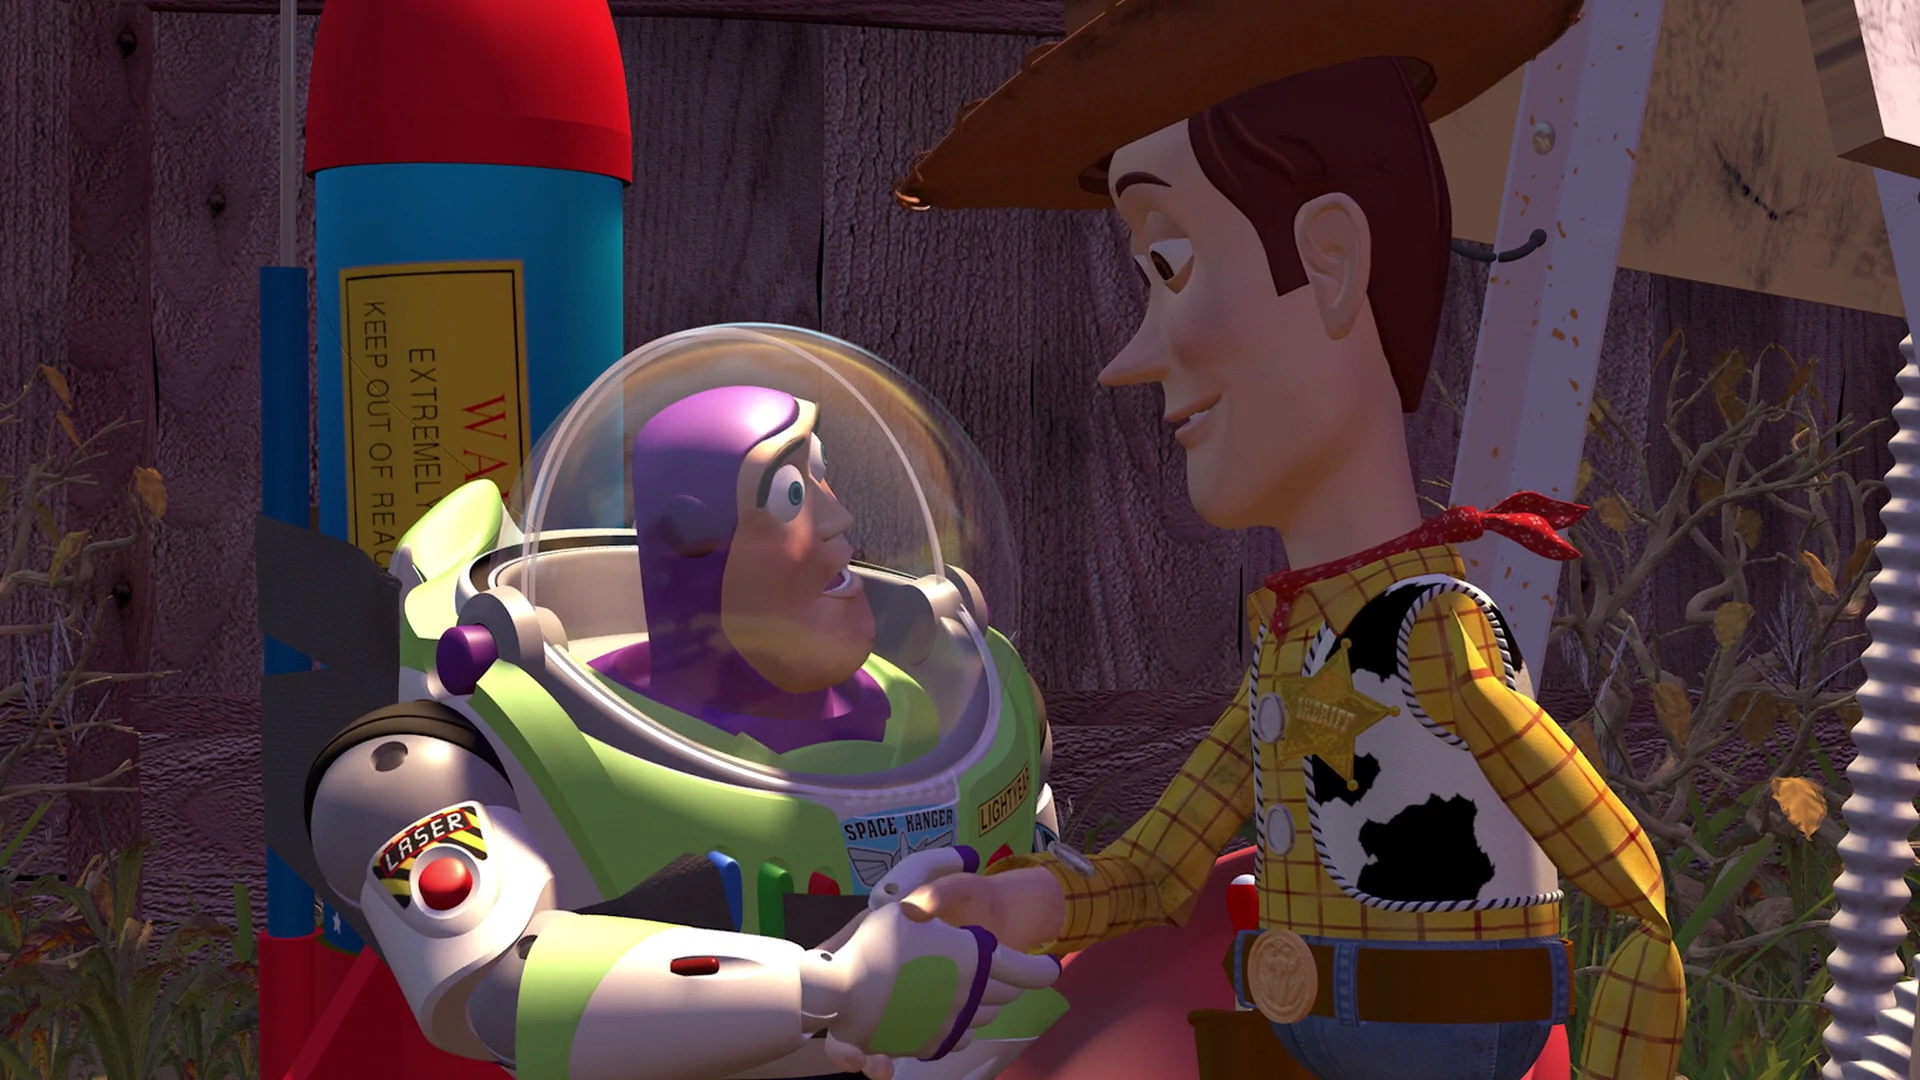 A scene from Toy Story